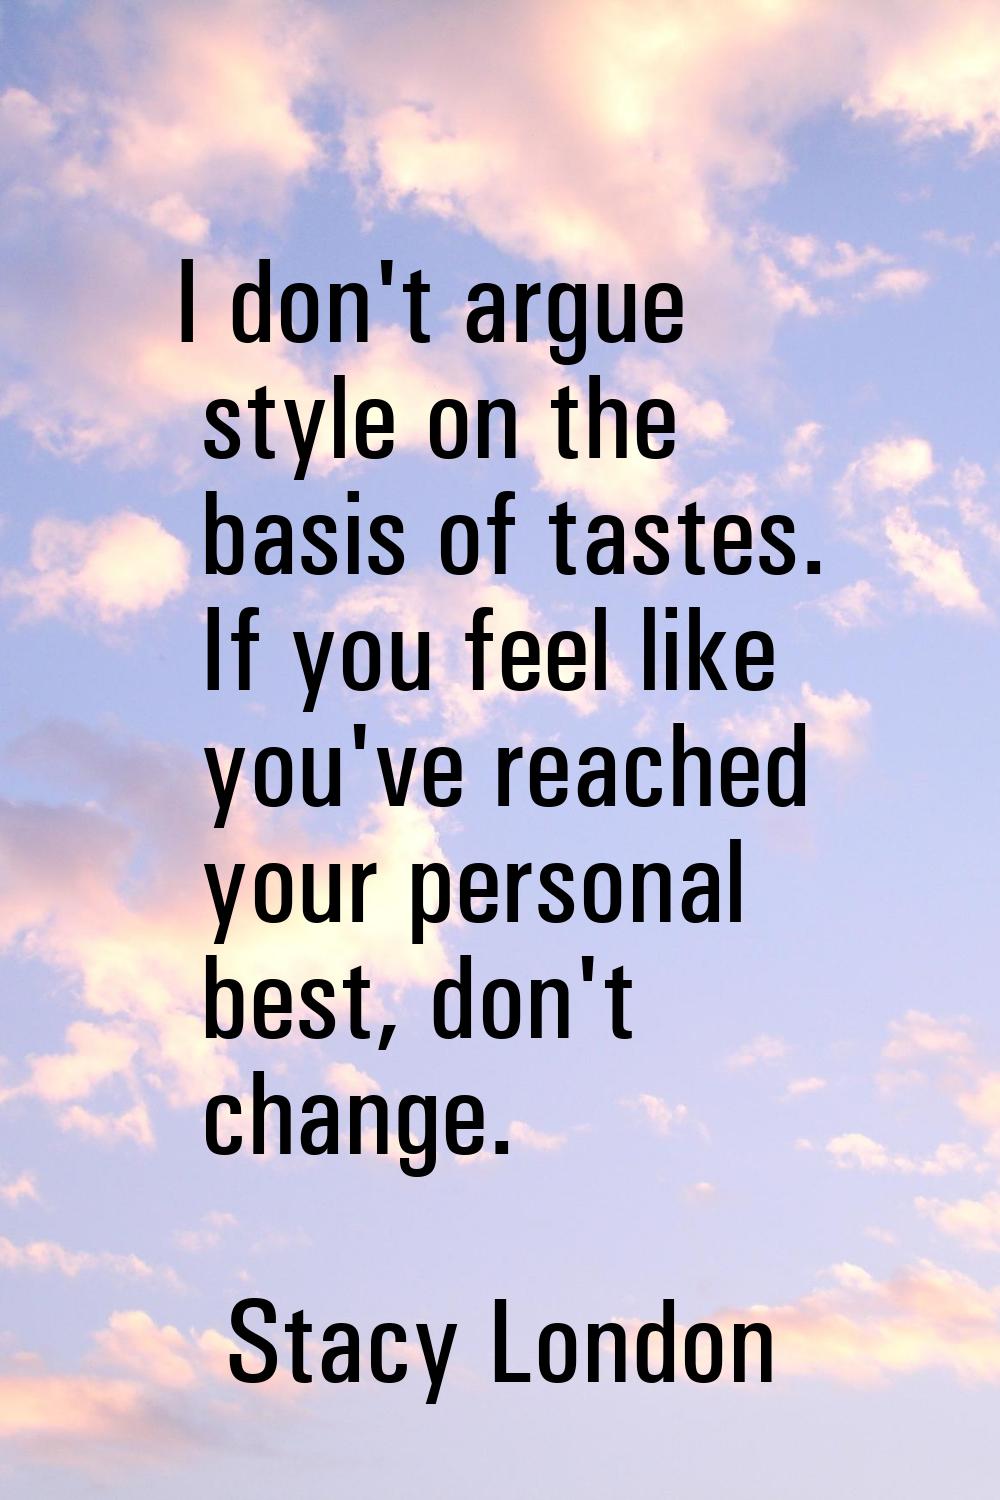 I don't argue style on the basis of tastes. If you feel like you've reached your personal best, don